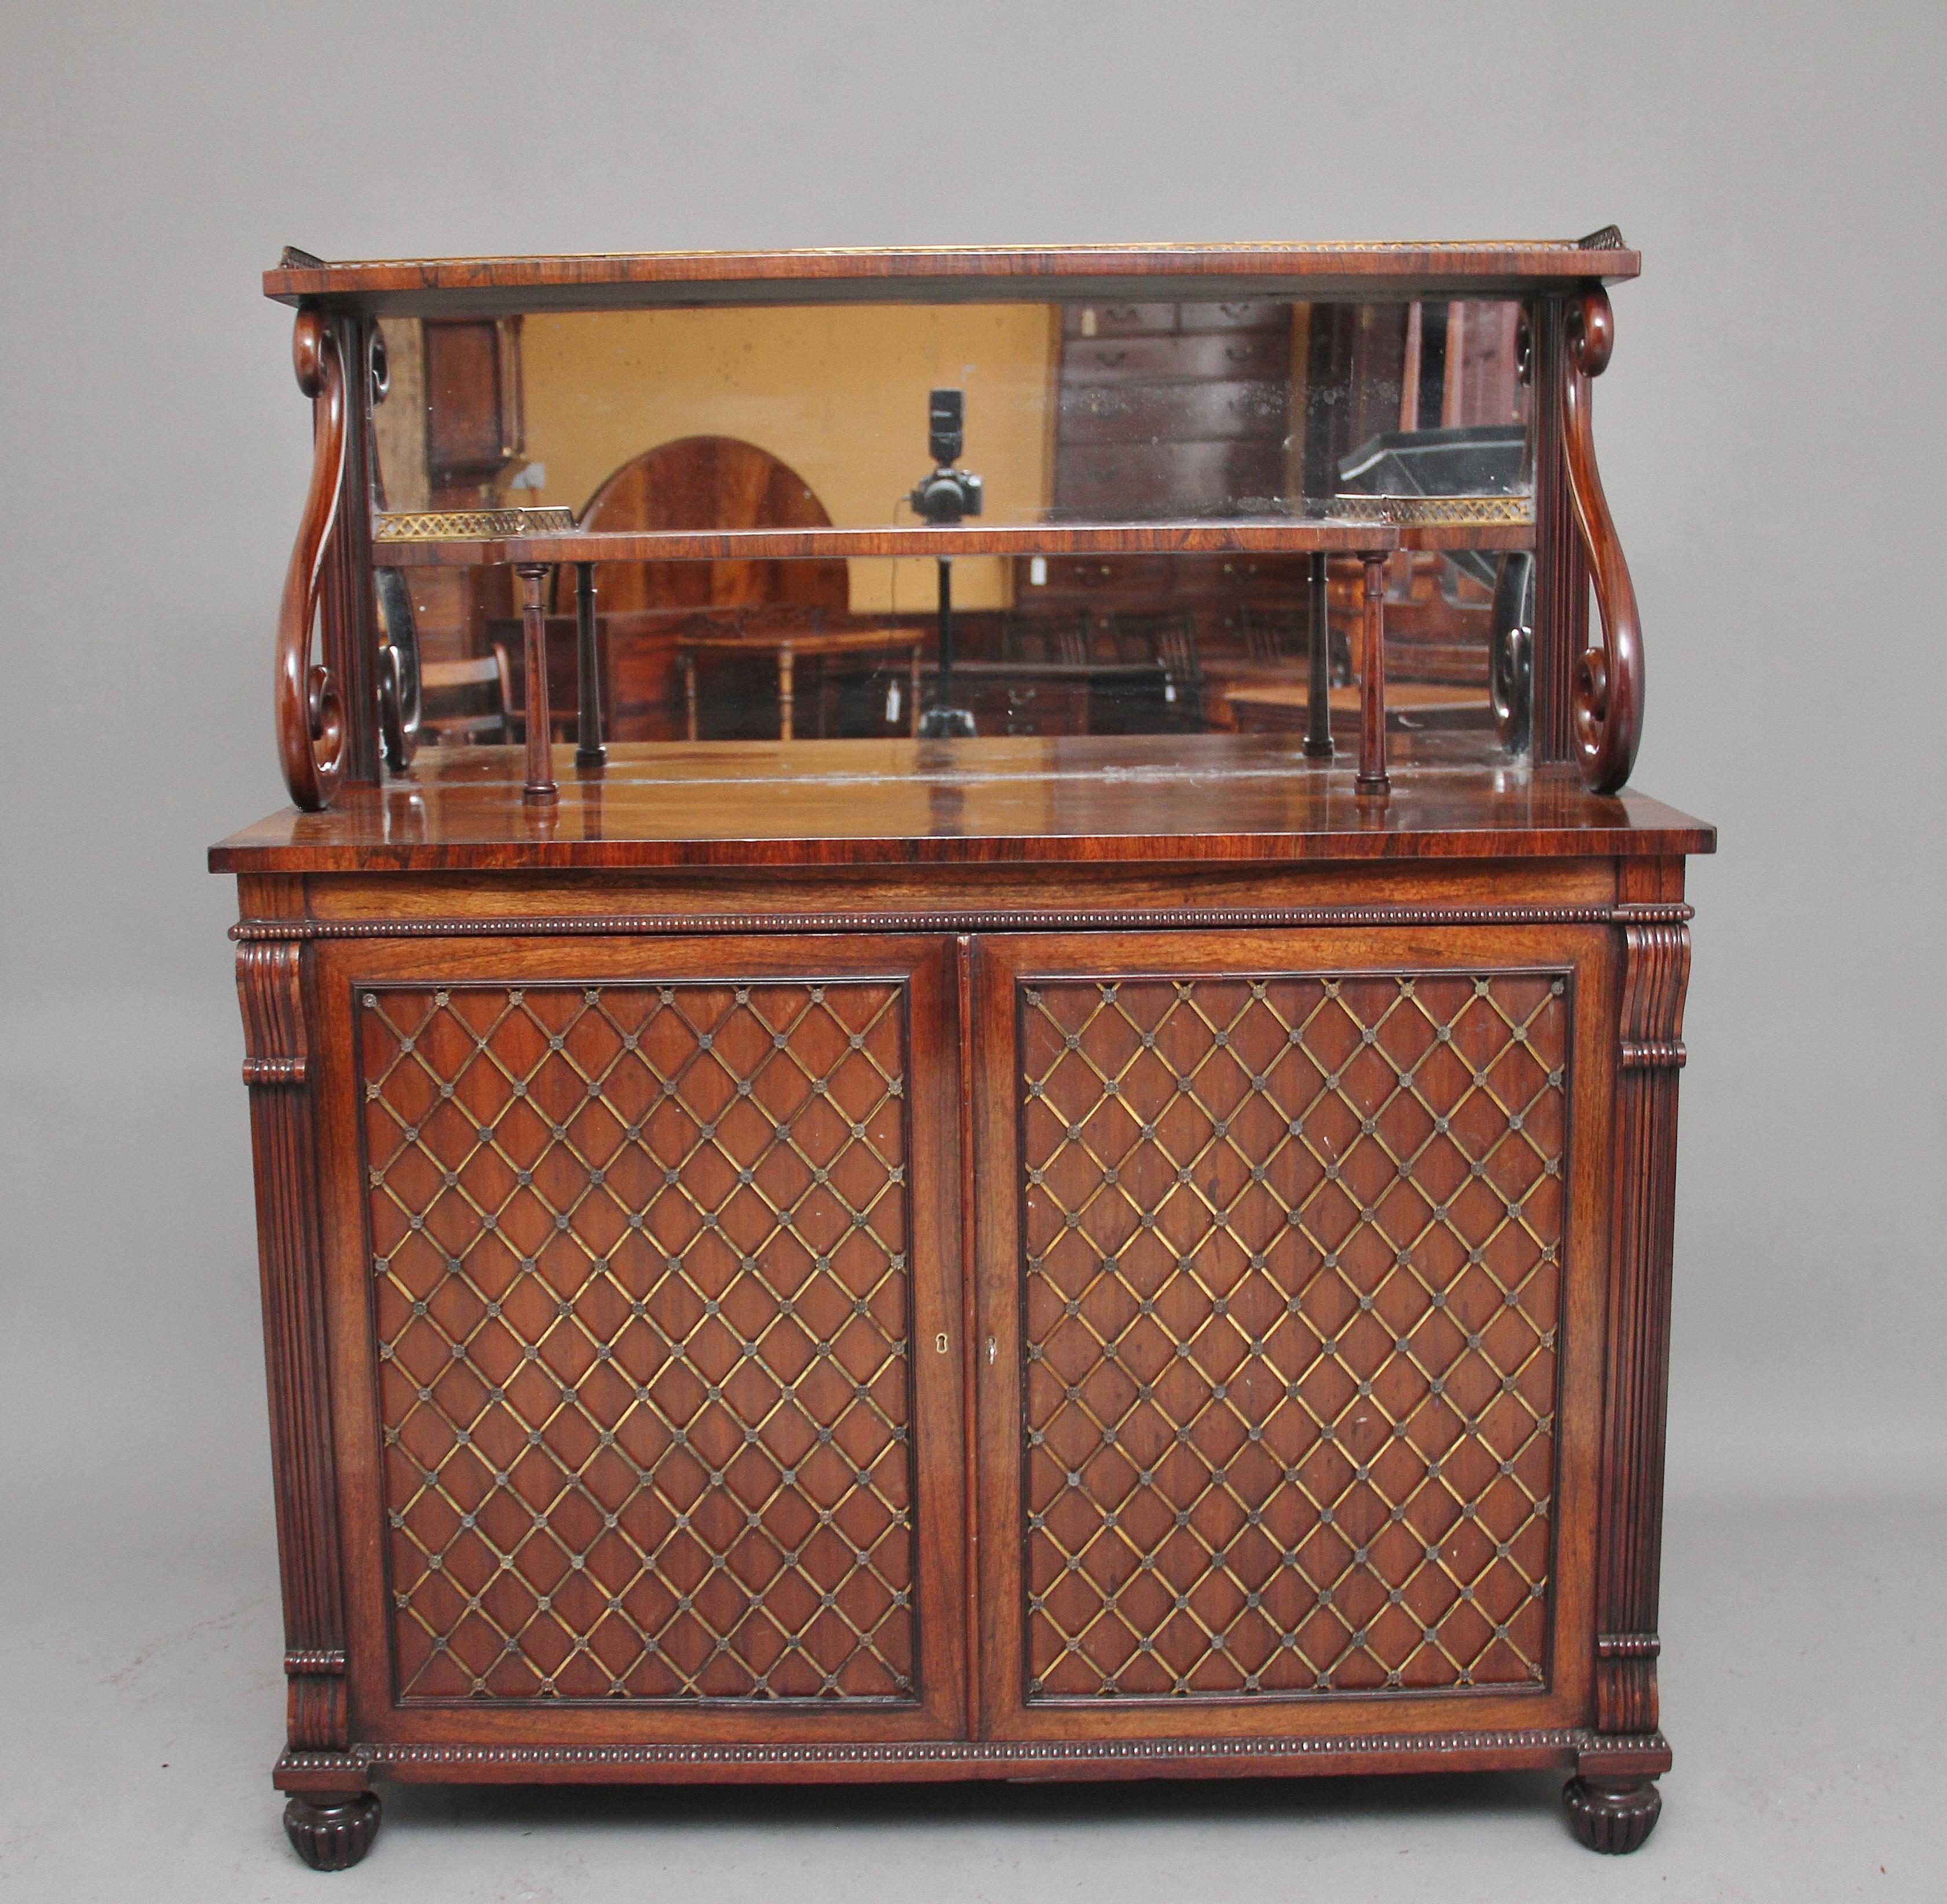 Early 19th century rosewood two tier cabinet of exceptional quality, the top tier having a pierced brass gallery running along the back and sides, the shaped tier below also decorated with a pierced brass gallery and supported on finely turned